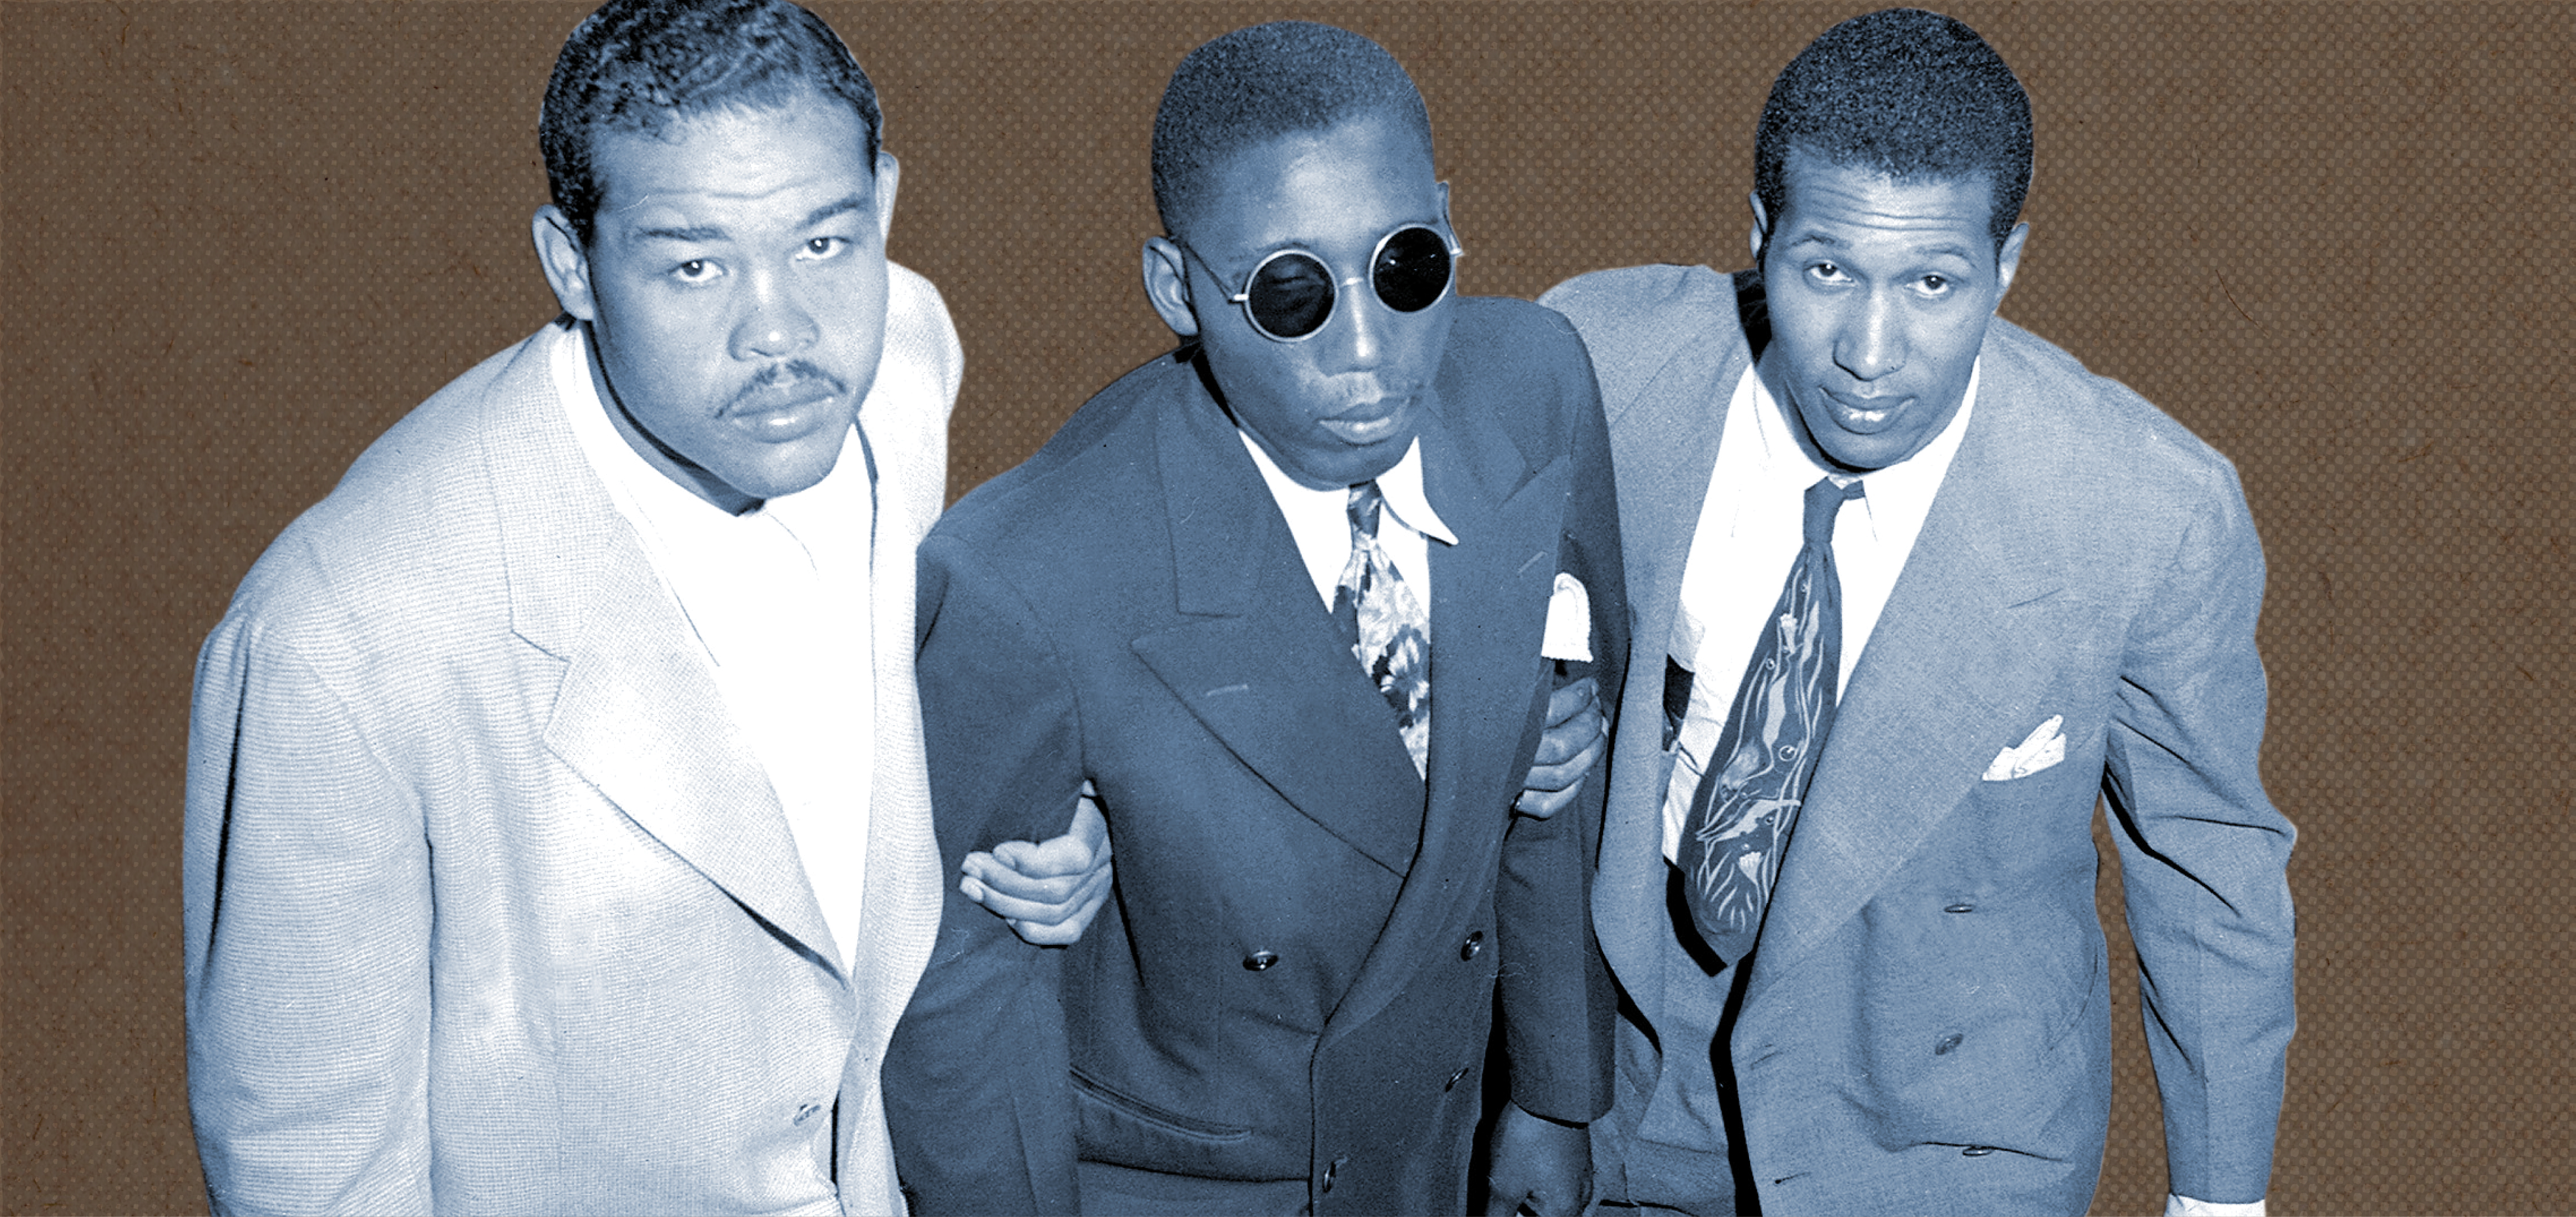 Sgt. Isaac Woodard, blind from a racially motivated beating, helped by two men